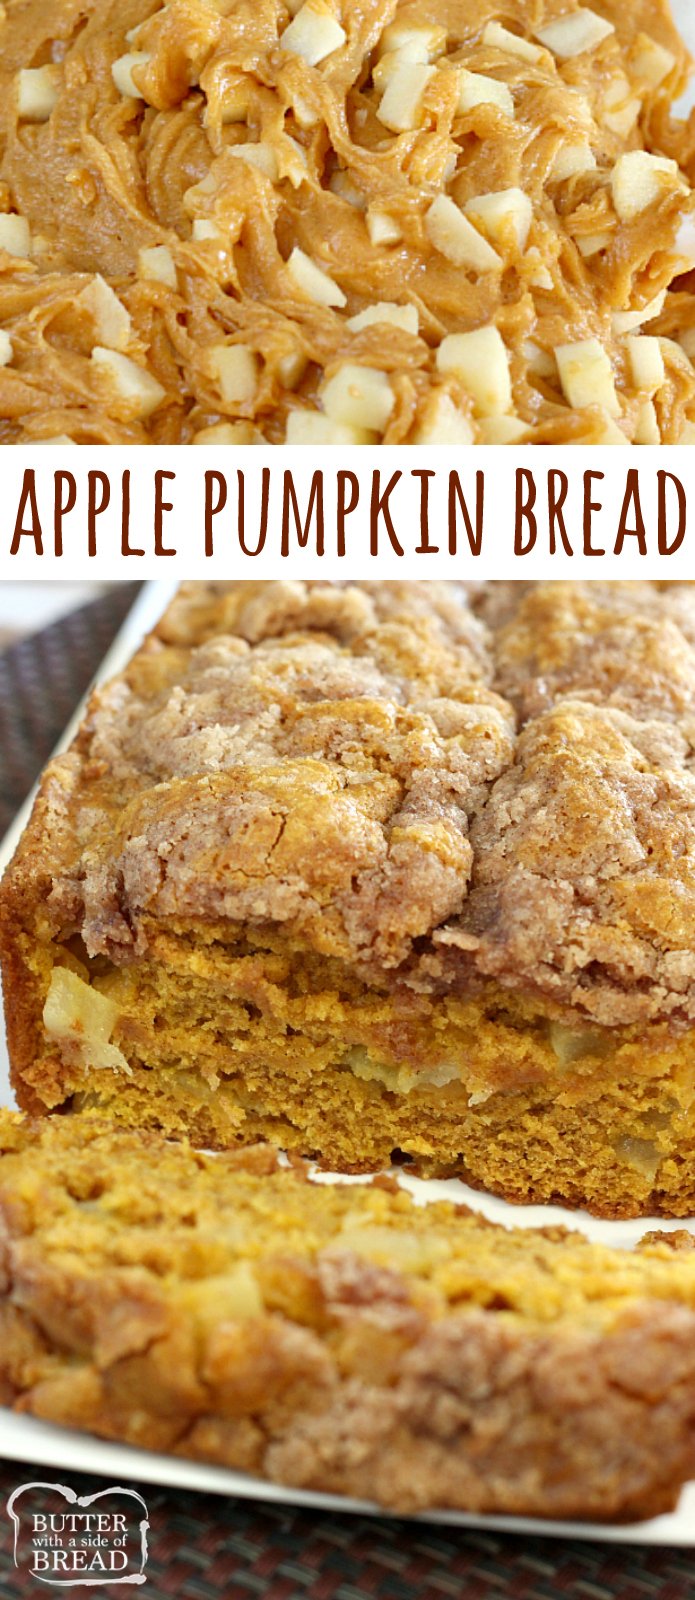 Apple Pumpkin Bread is the perfect blend of two favorite fall flavors  - pumpkin and fresh apples! The crumbly cinnamon and sugar streusel on top adds the most amazing texture and flavor to this delicious quick bread.